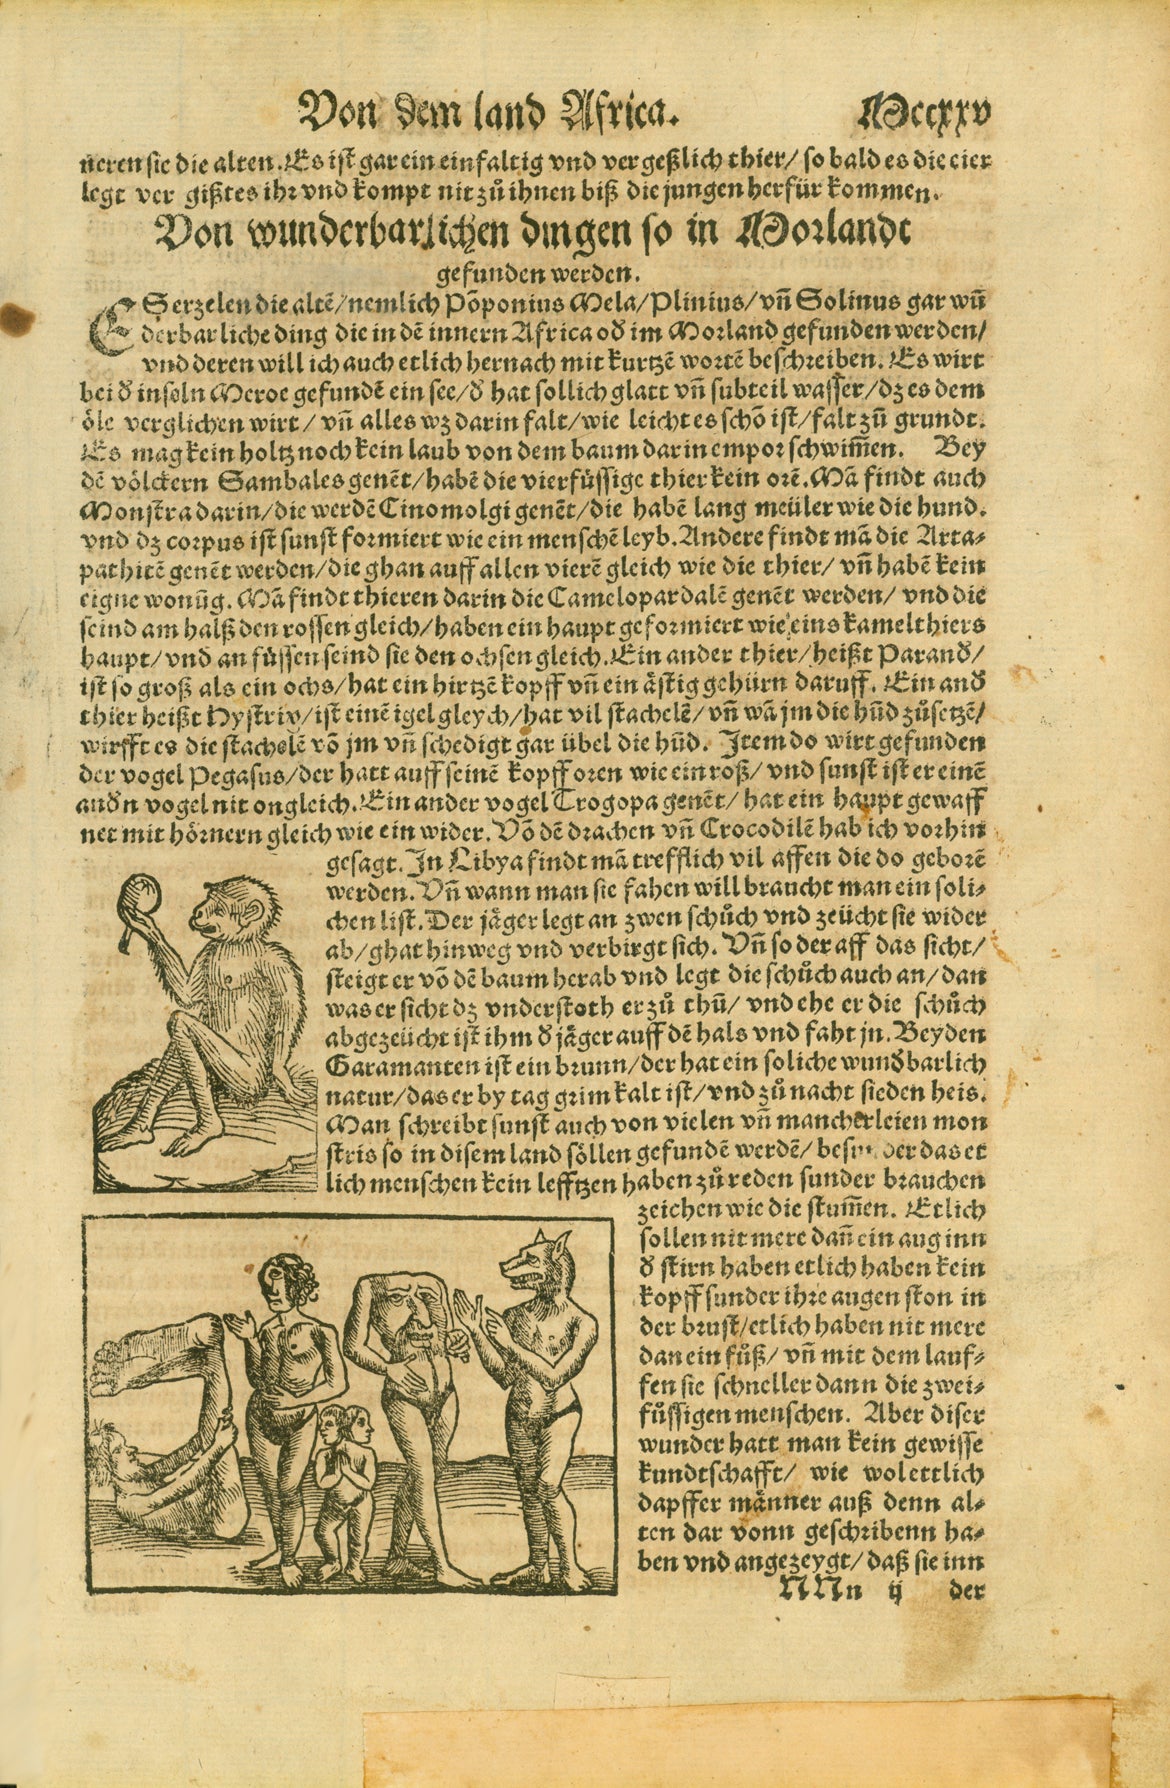 Legendary. Mixed creatures.  Monkey and Mixed creatures  Woodcut.  Text about monkeys found in Lybia and other parts of Africa. in German language Text on the reverse side about northern Africa, Canary Islands and Madeira.  Published in "Cosmographia"  By Sebastian Muenster (1488-1552)  Printed by Heinrich Petri. Basel, 1553  Original antique print , kkk